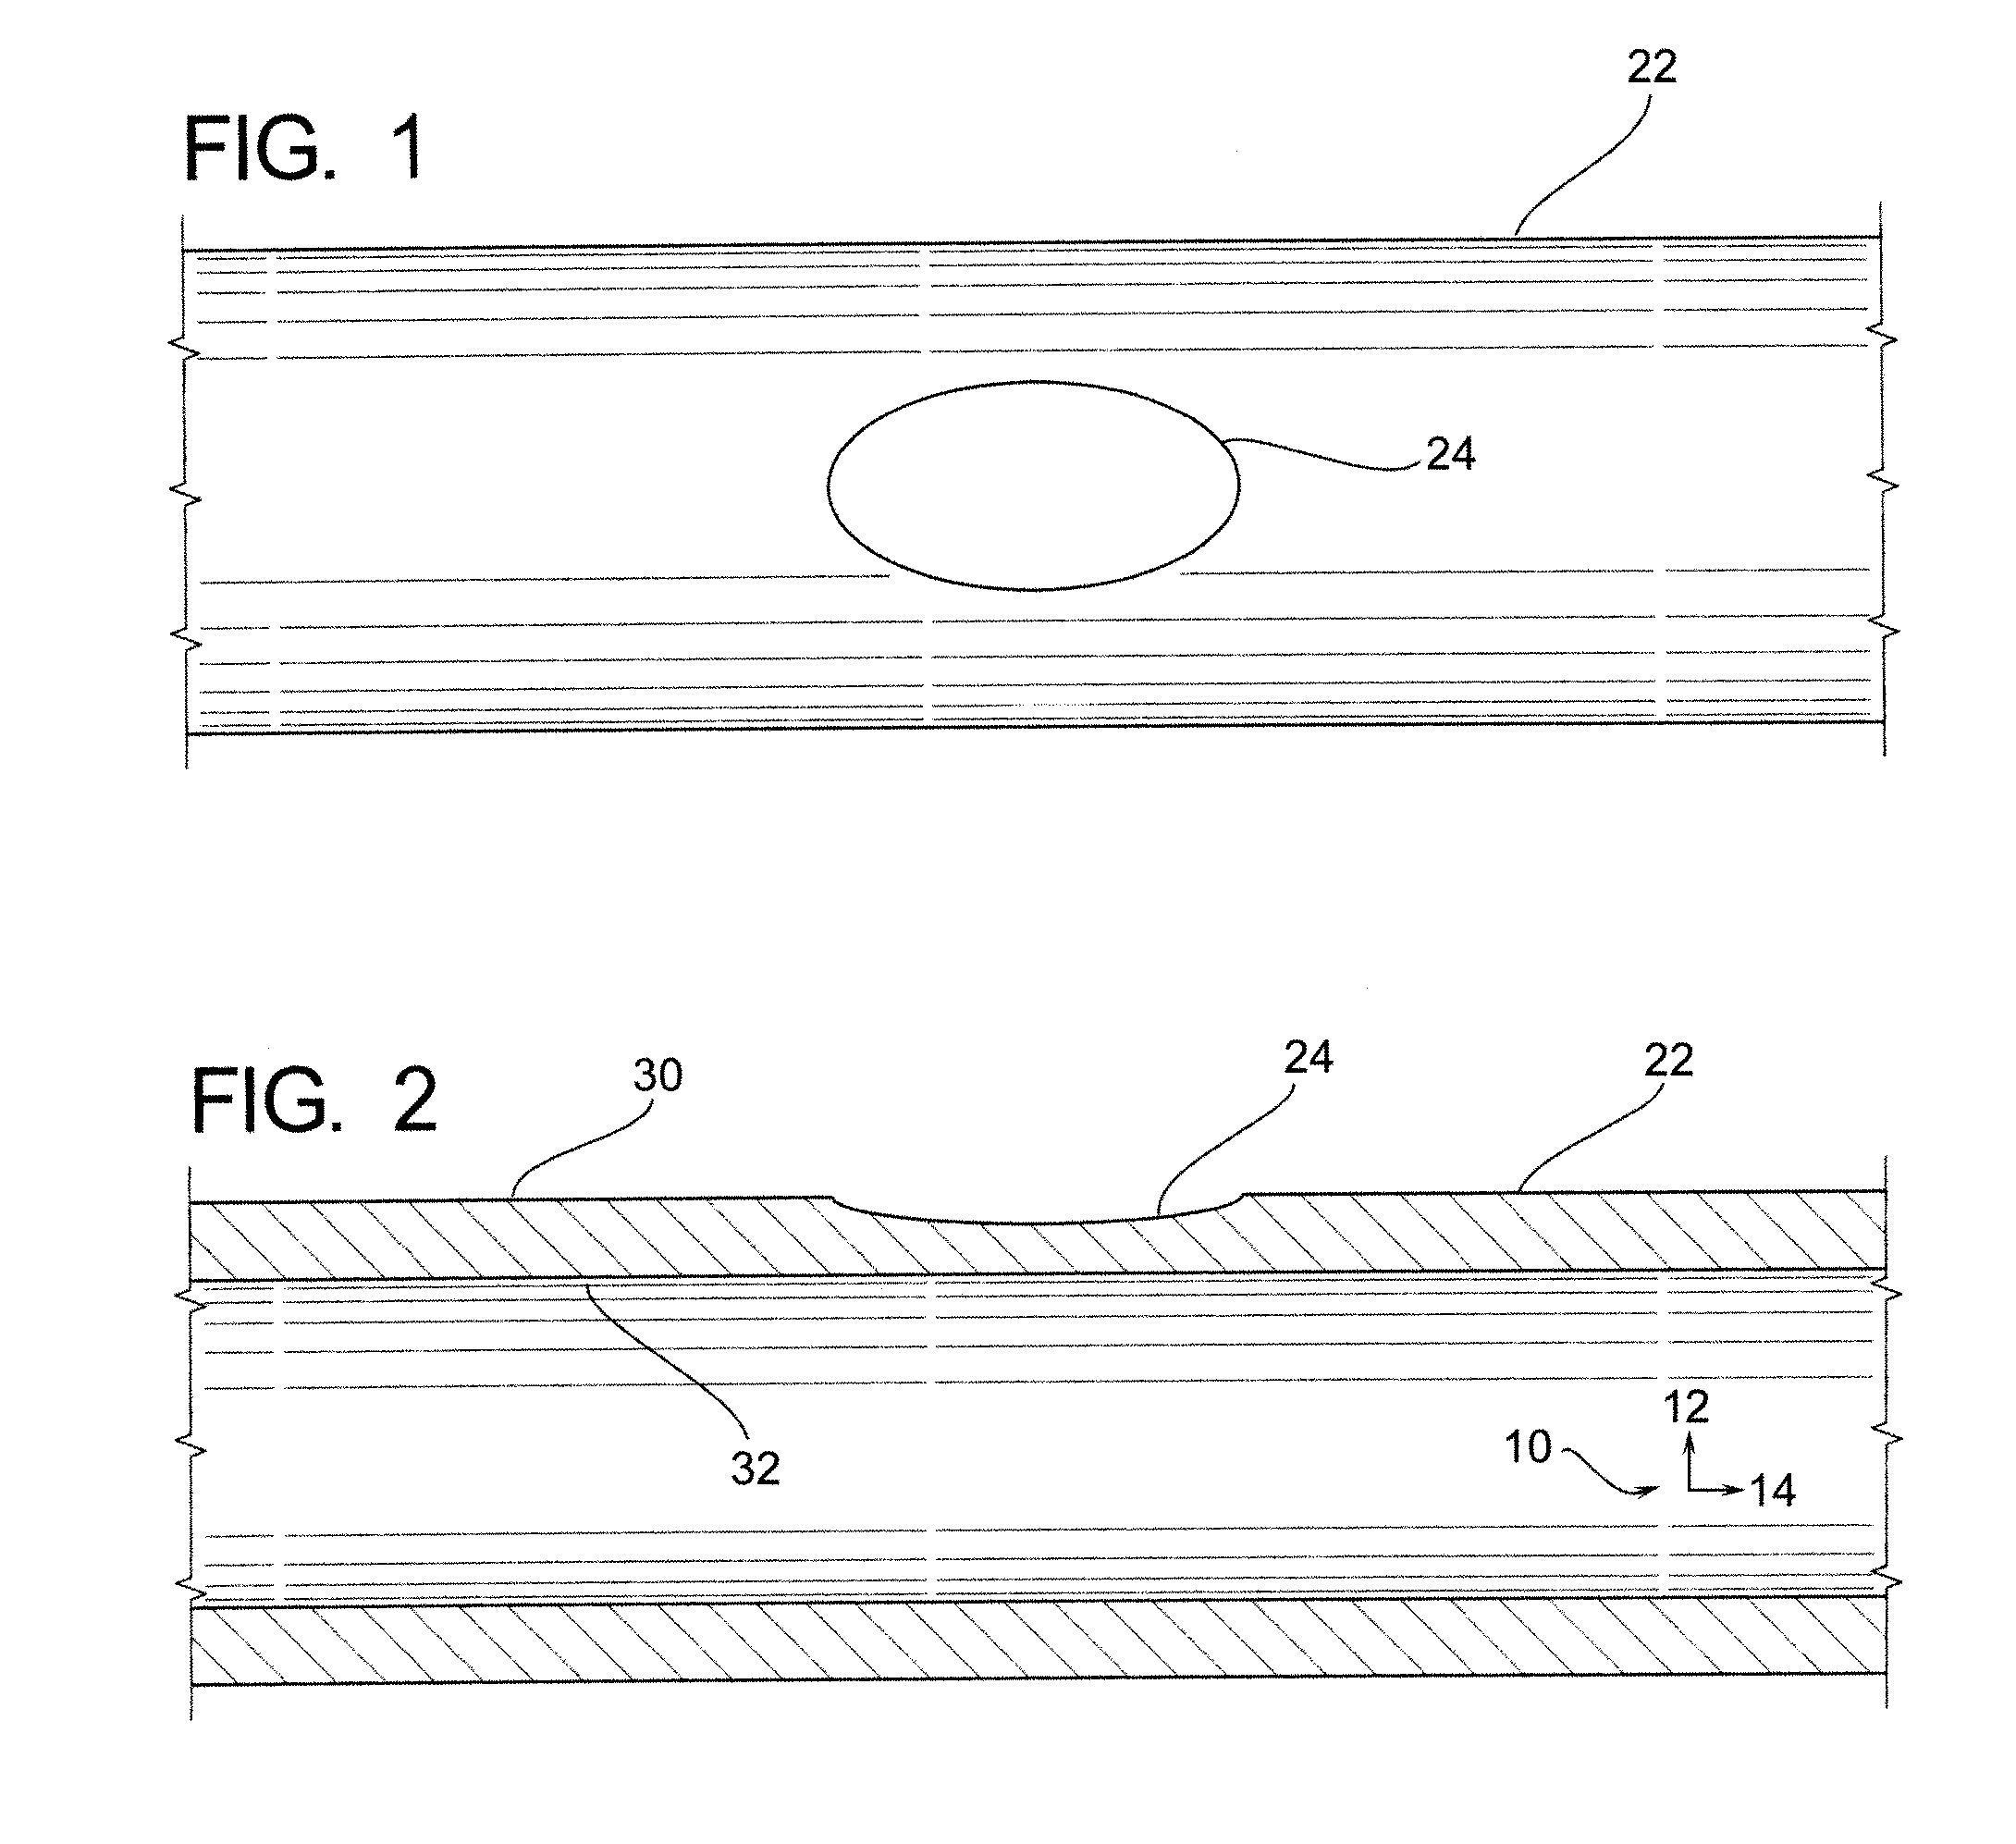 Repair apparatus and method for pipe and fittings